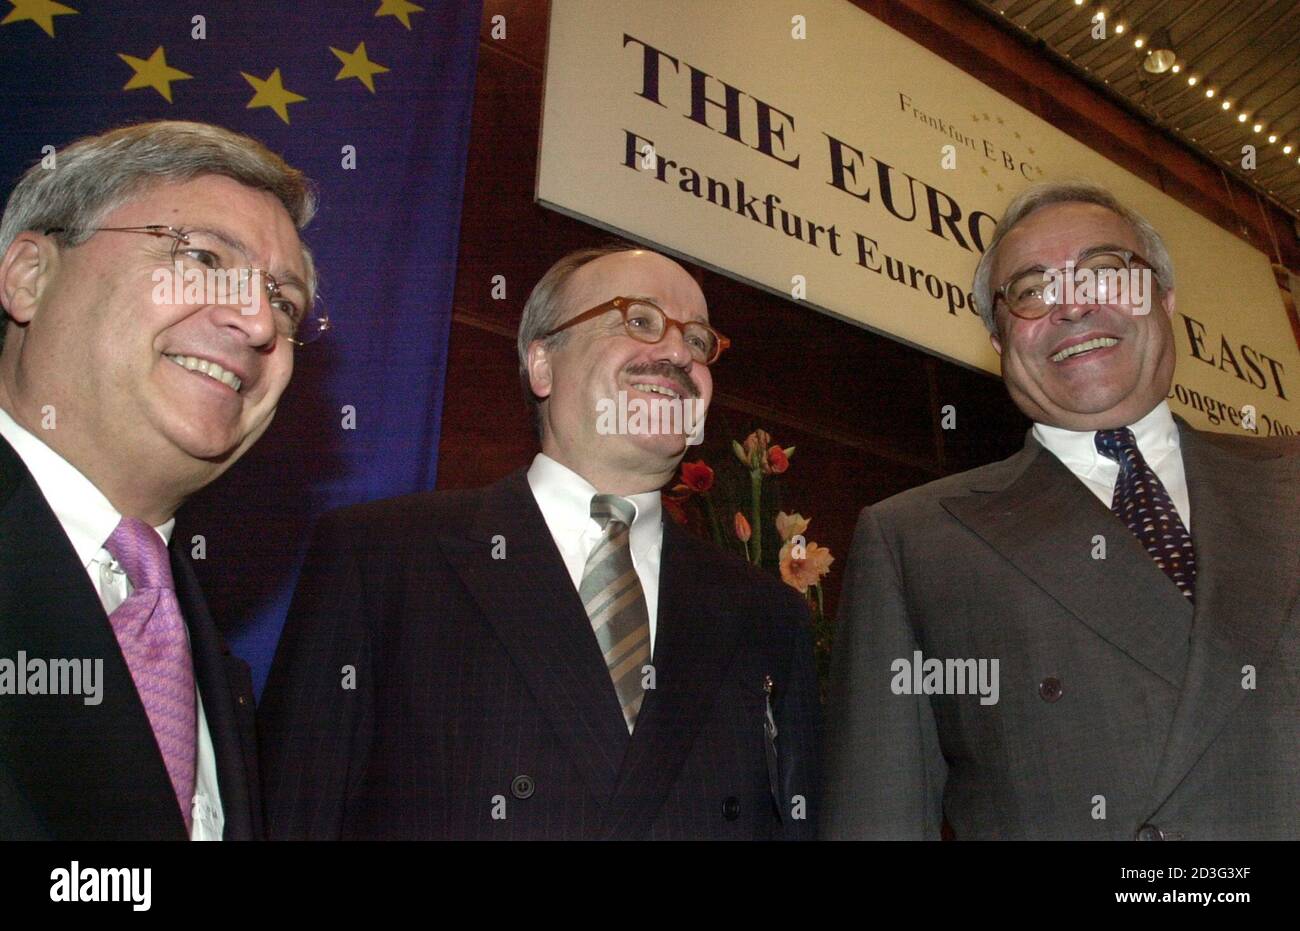 MUELLER OF COMMERZBANK FAHRHOLZ OF DRESDNER BANK AND BREUER OF DEUTSCHE BANK POSE AT A CONGRESS IN FRANKFURT.  Commerzbank CEO Klaus-Peter Mueller, Dresdner Bank CEO Bernd Fahrholz and Deutsche Bank CEO Rolf Breuer (LtoR) pose during a European Bankers Conference in Frankfurt November 23, 2001. European bankers discuss monetary issues of the European Union and the future of Europes new currency, the euro. REUTERS/Ralph Orlowski Stock Photo